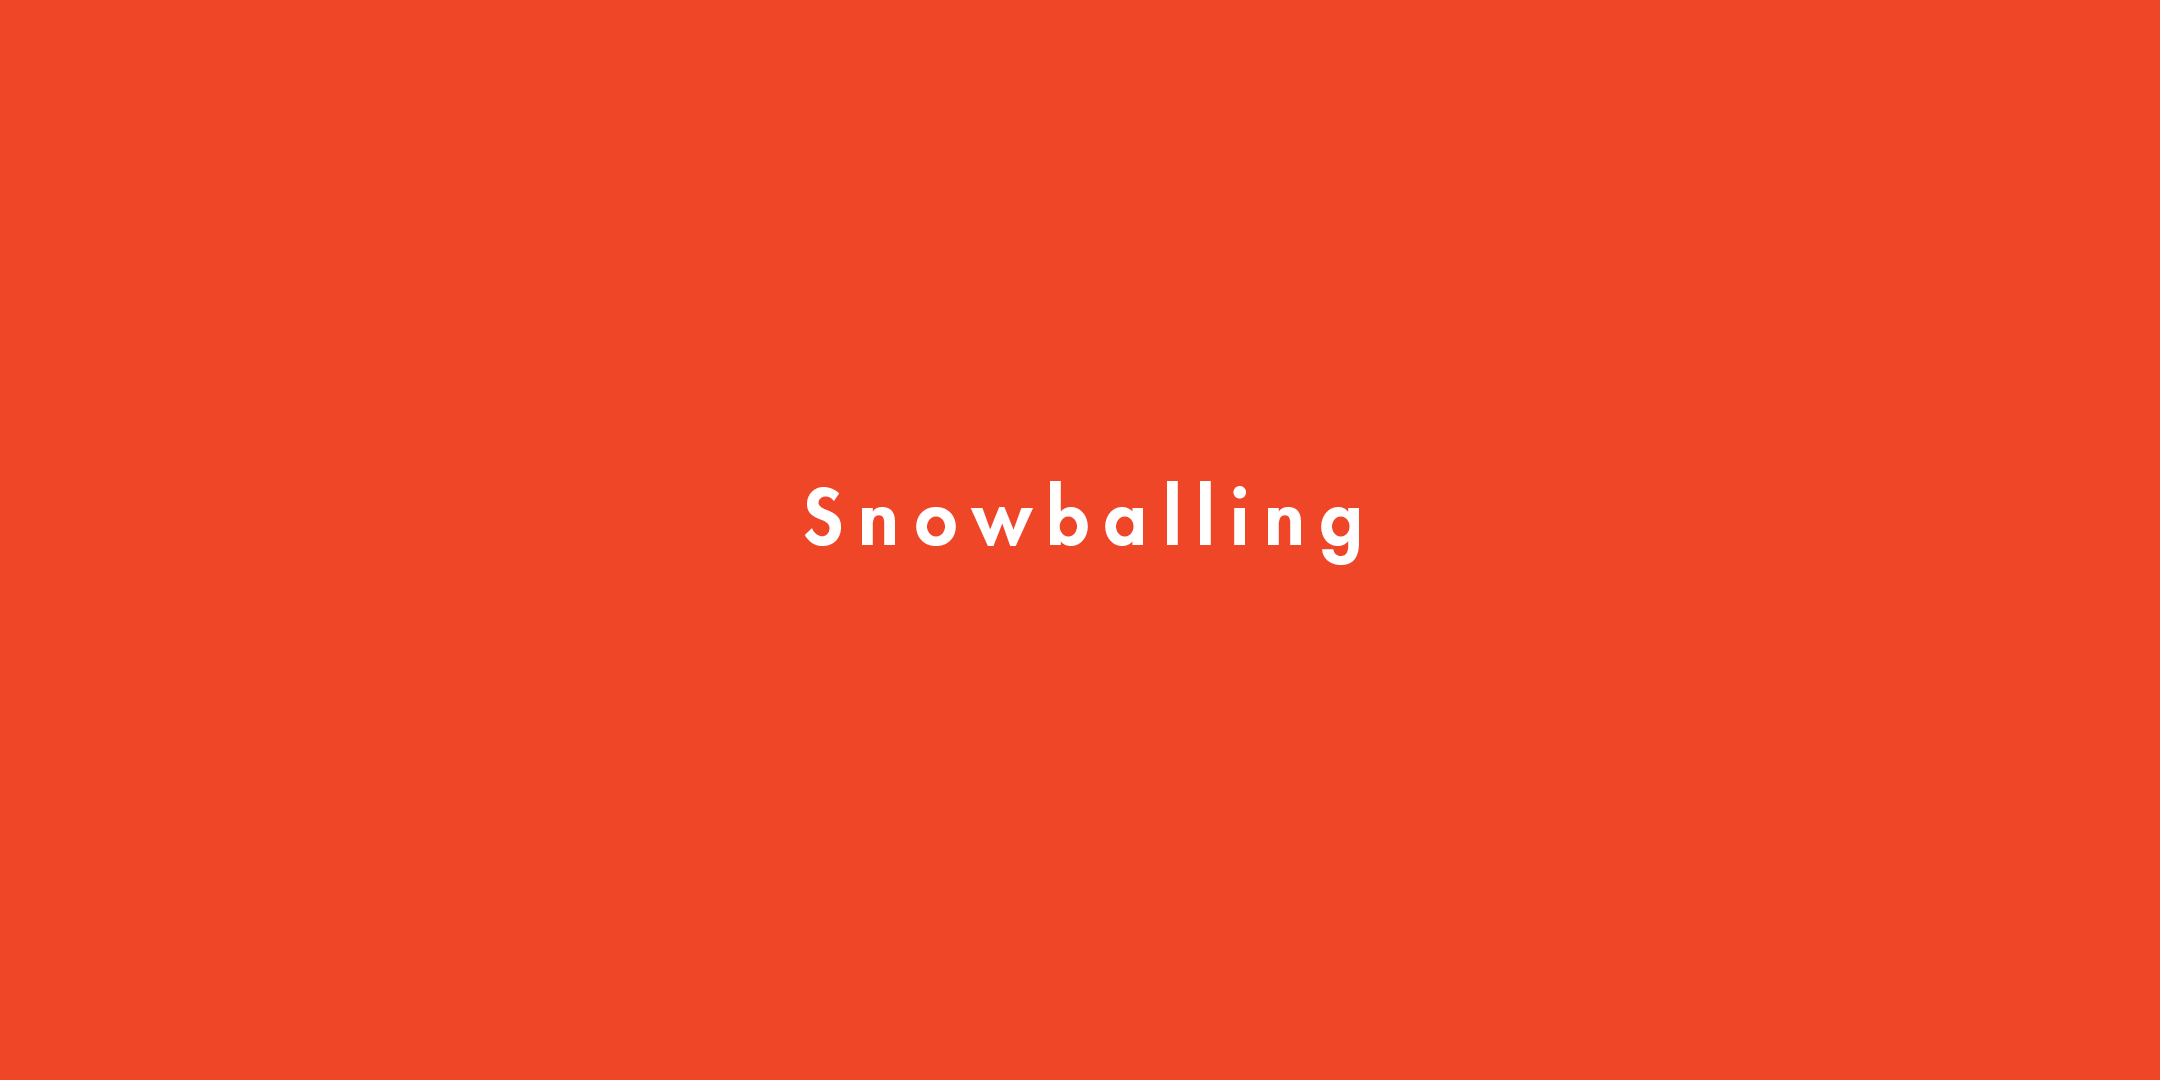 What Is Snowballing